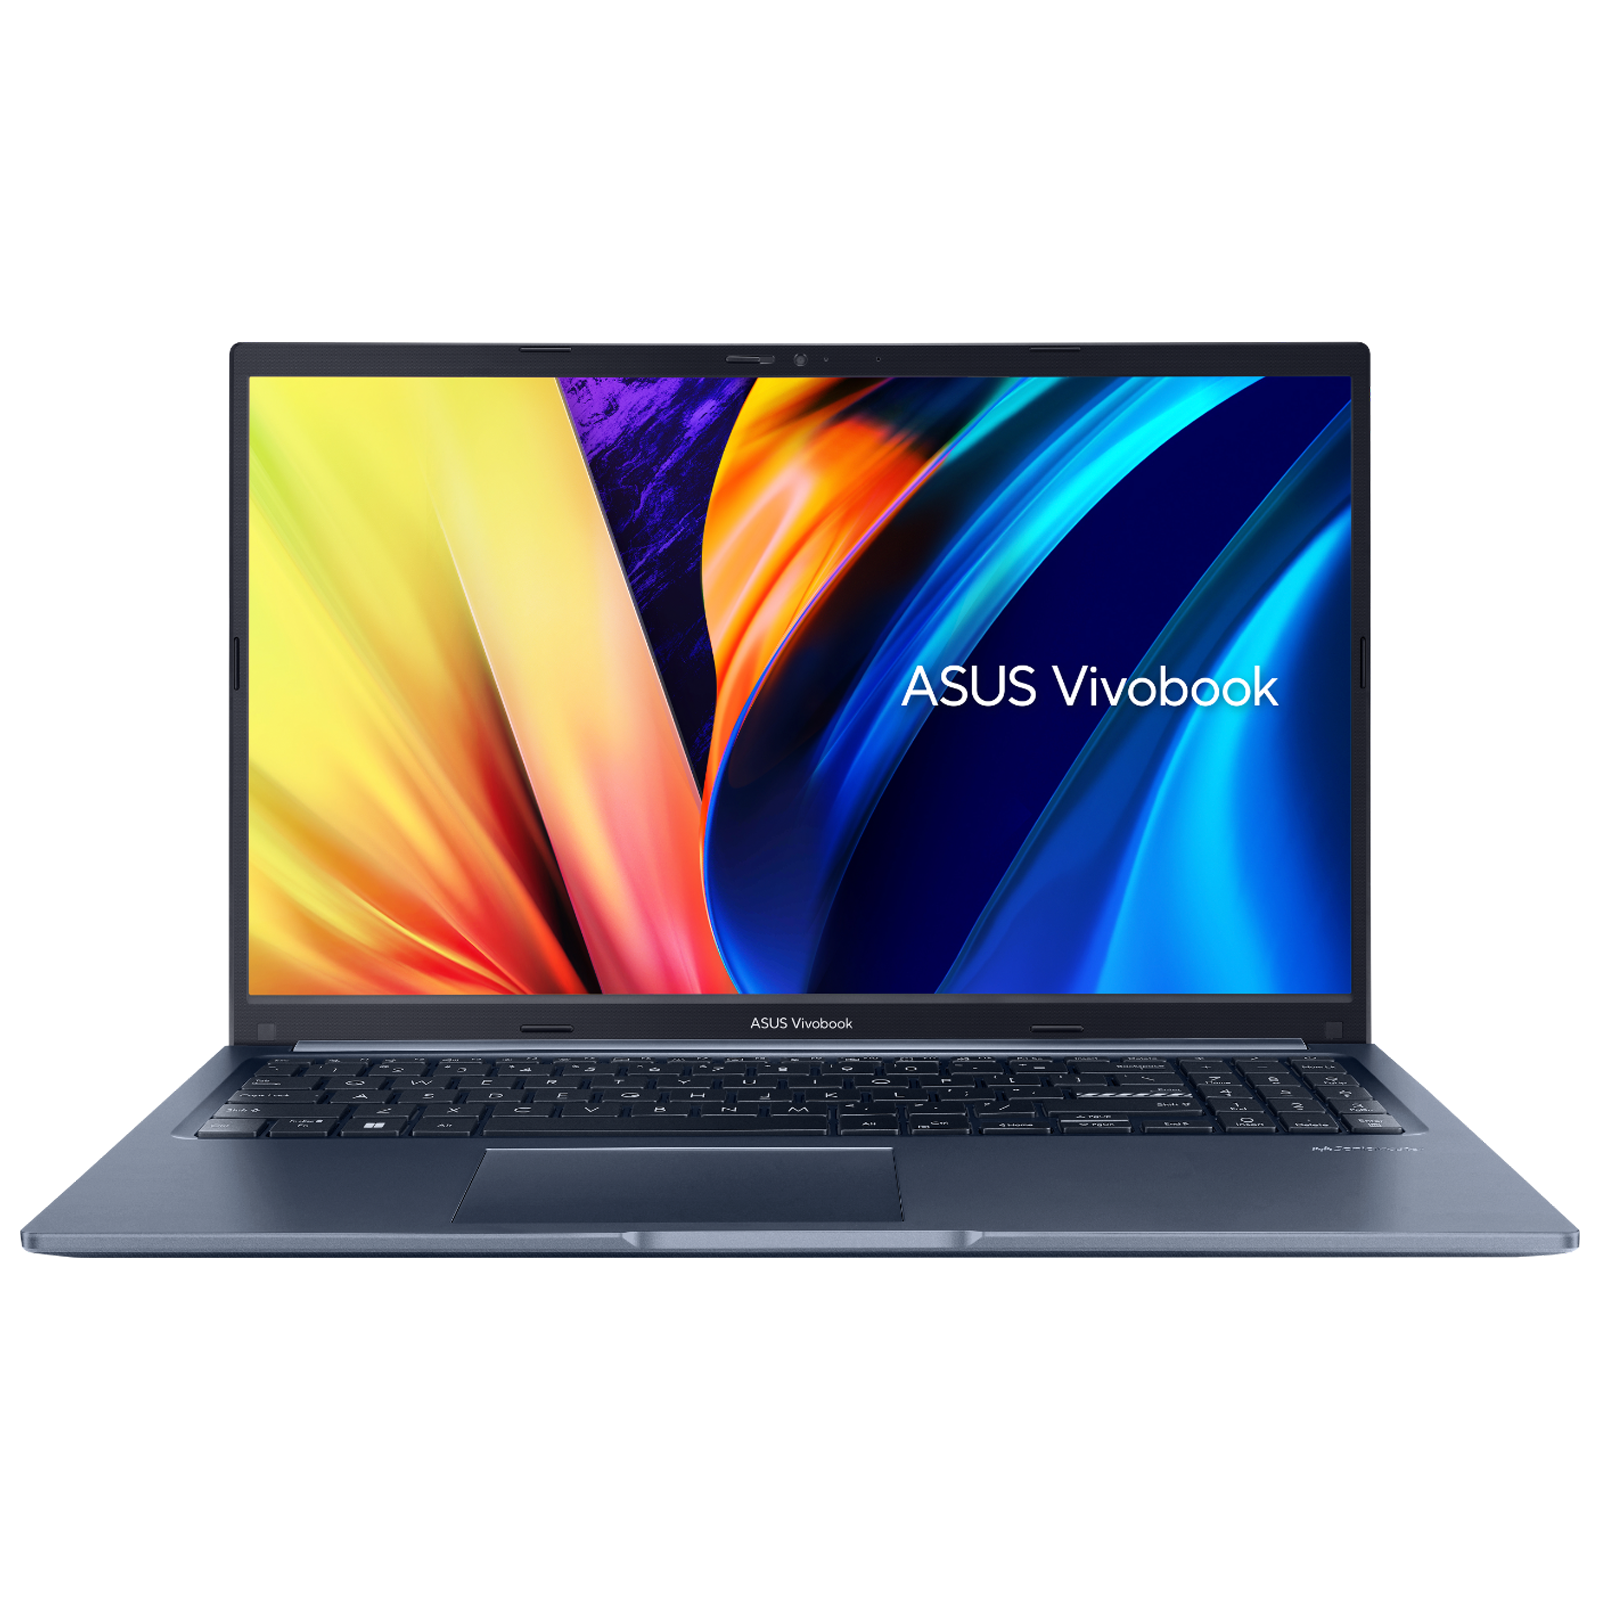 ASUS Vivobook 15 X1502ZA-EJ532WS Intel Core i5 12th Gen Thin and Light Laptop (8GB, 512GB SSD, Windows 11 Home, 15.6 inch Full HD LED-Backlit Display, MS Office 2021, Quiet Blue, 1.7 KG)